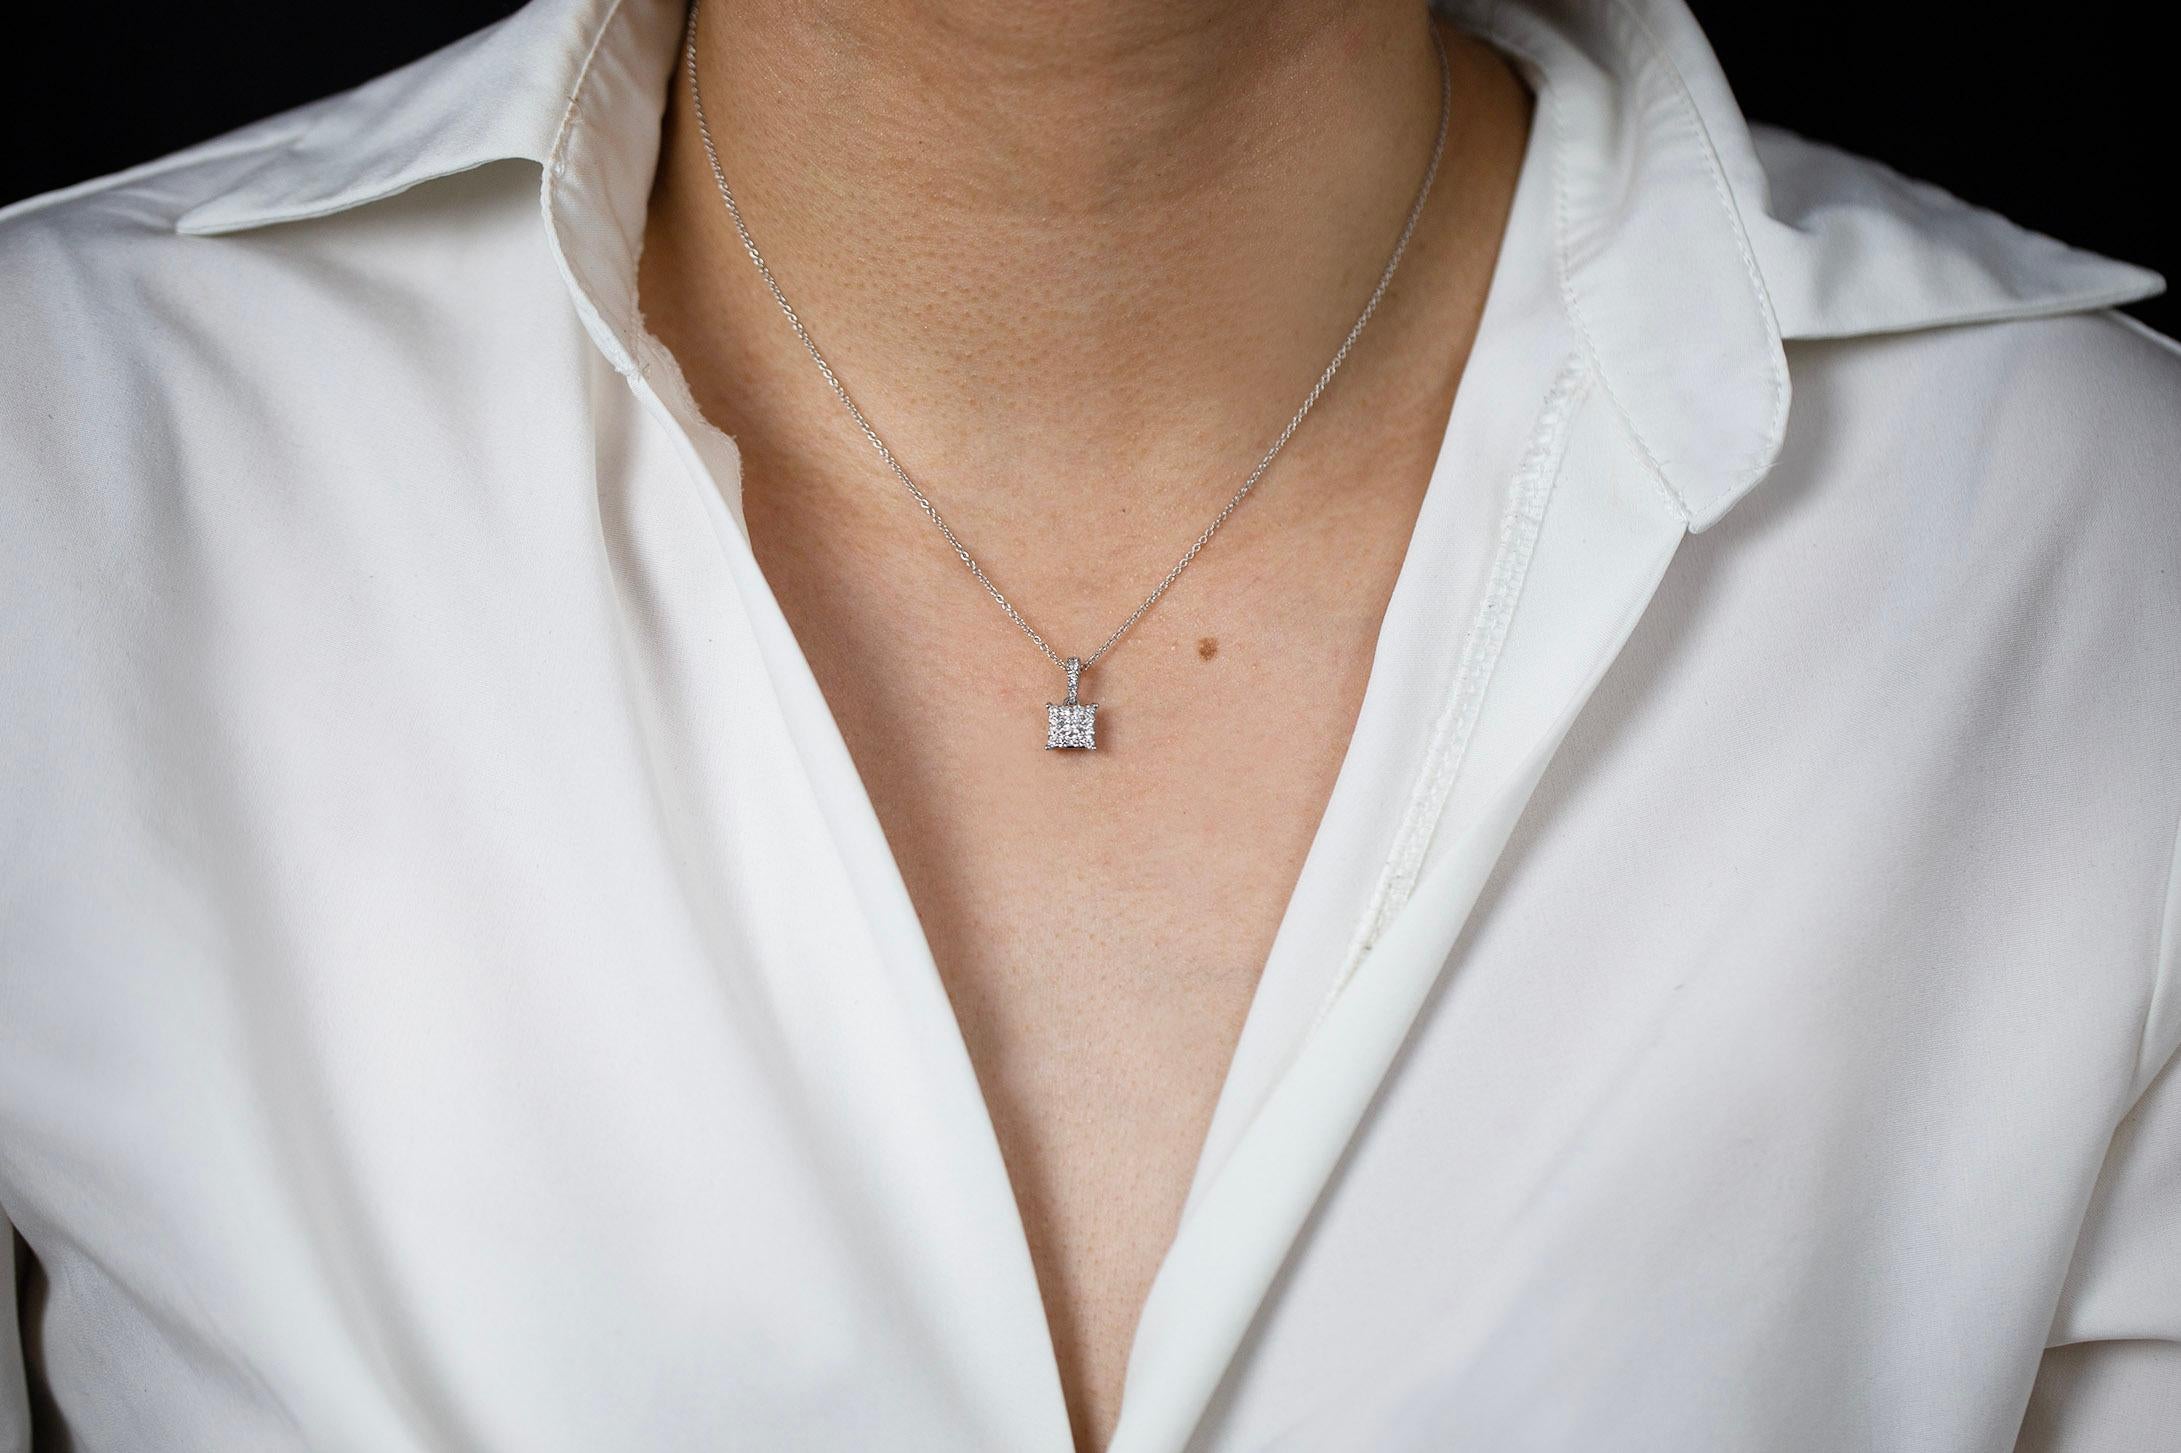 Showcasing a cluster of round diamonds illusion-set in a square mounting. The illusion setting makes it look like one big diamond. Diamonds weigh 0.47 carats total. Made in 18k white gold. Suspended on an 16 inch adjustable white gold chain.

Style